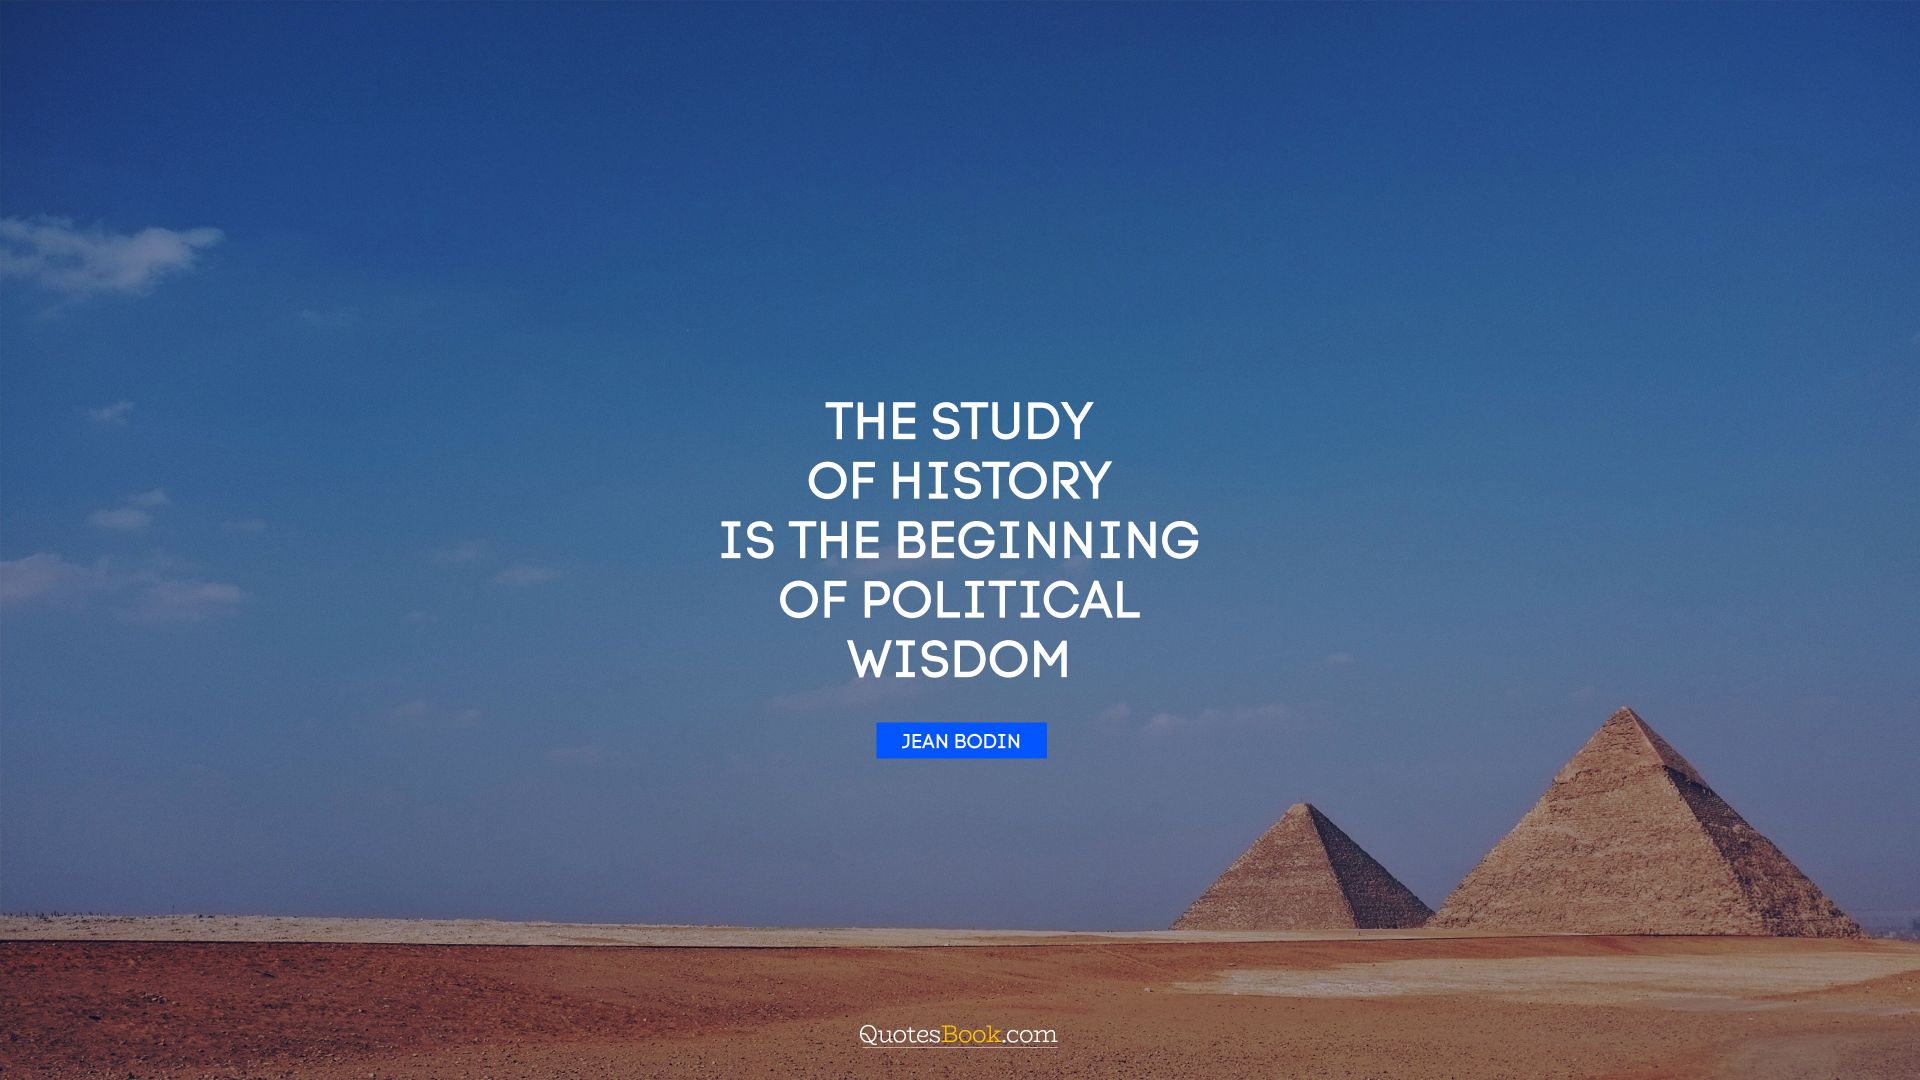 The study of history is the beginning of political wisdom. - Quote by Jean Bodin